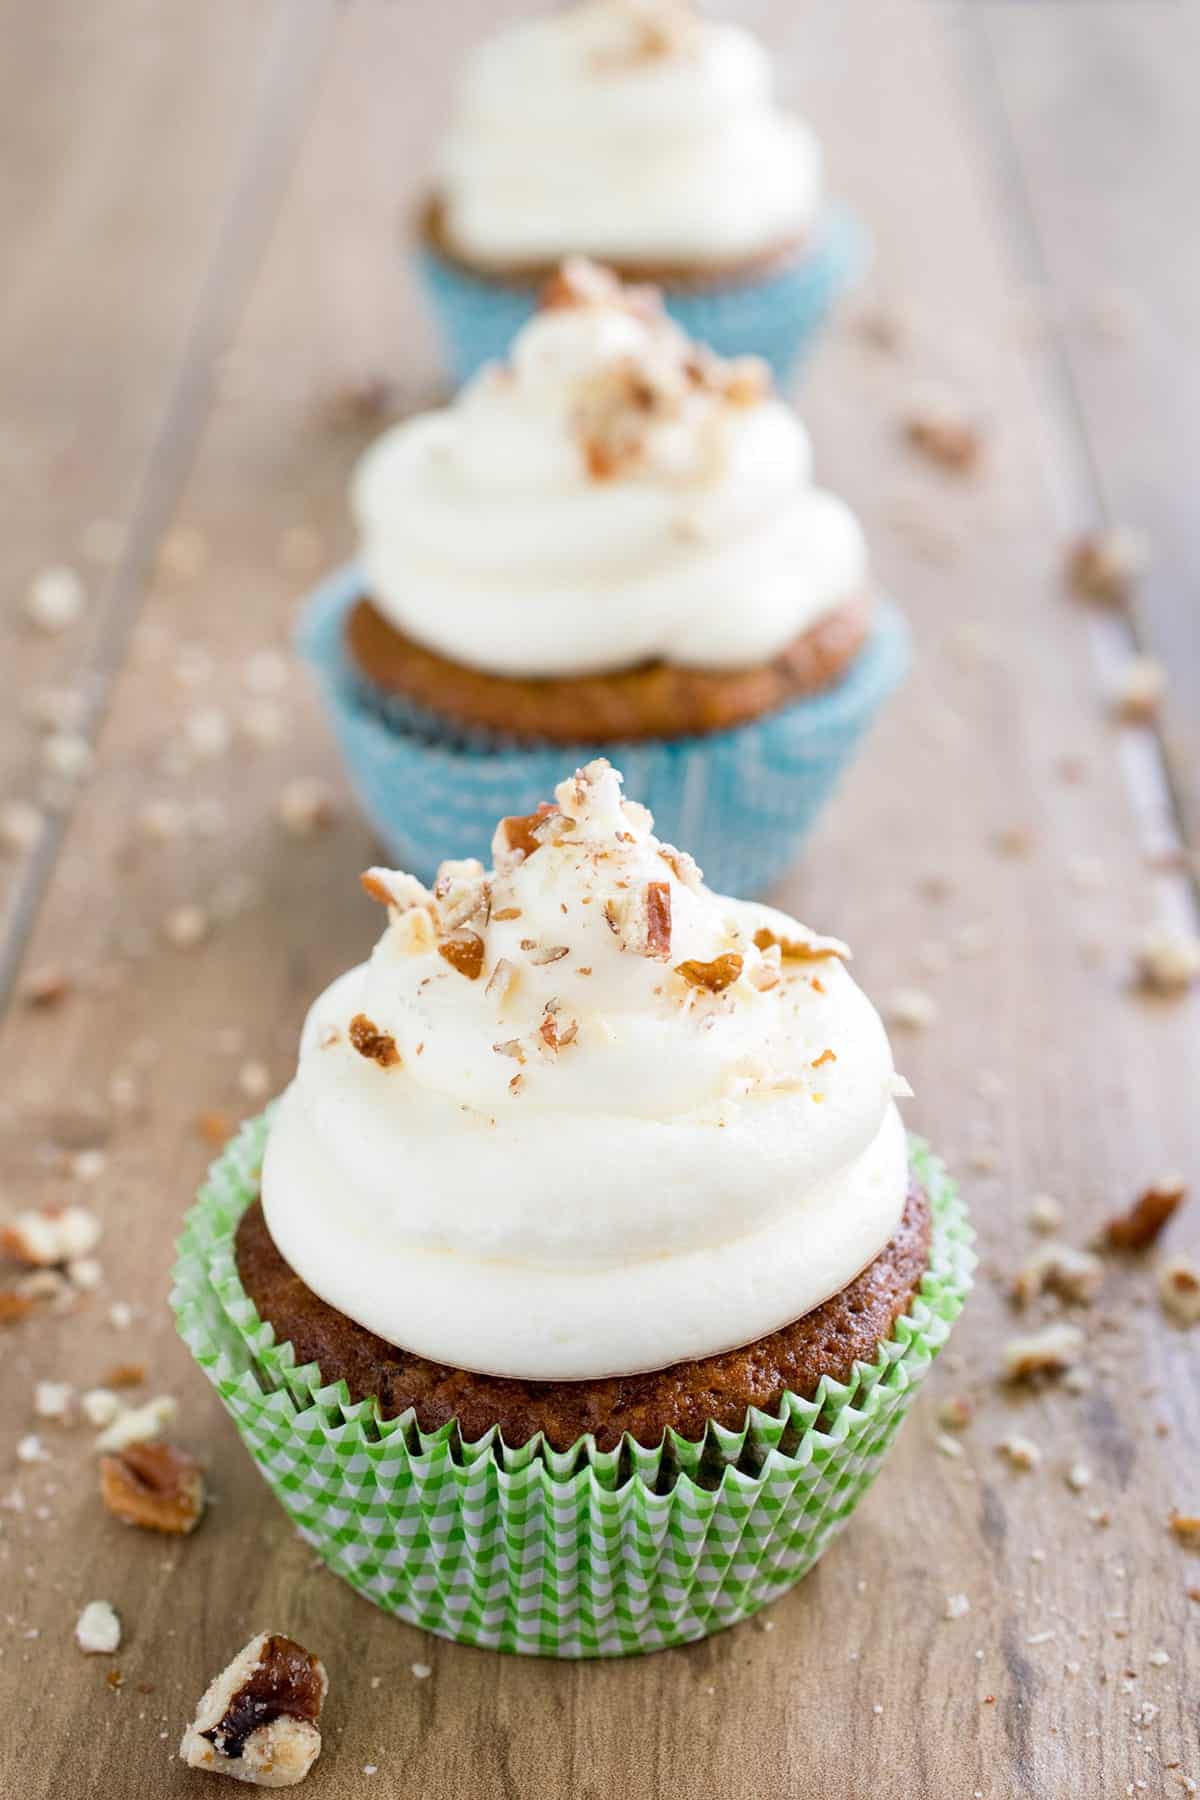 Row of delicious carrot cake cupcakes piled high with cream cheese frosting and garnished with chopped walnuts